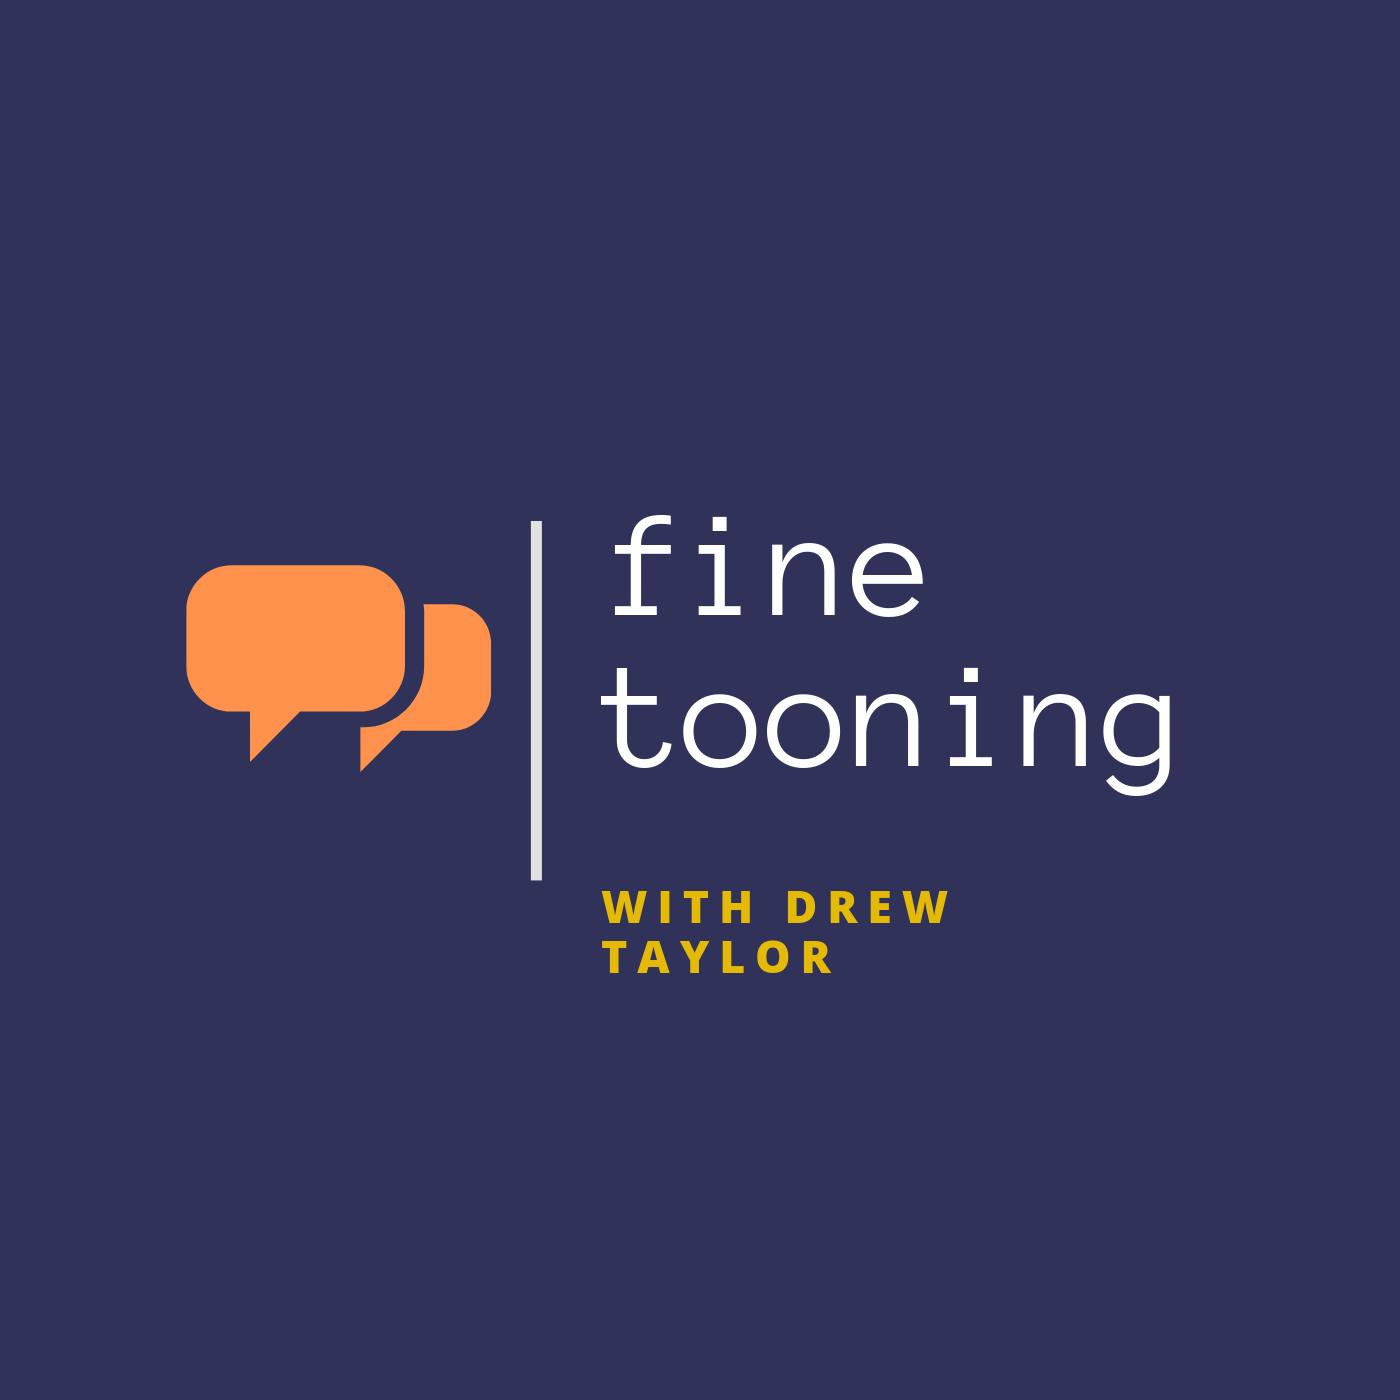 Fine Tooning with Drew Taylor - Episode 122: Why the “Roger Rabbit” sequels all stalled out